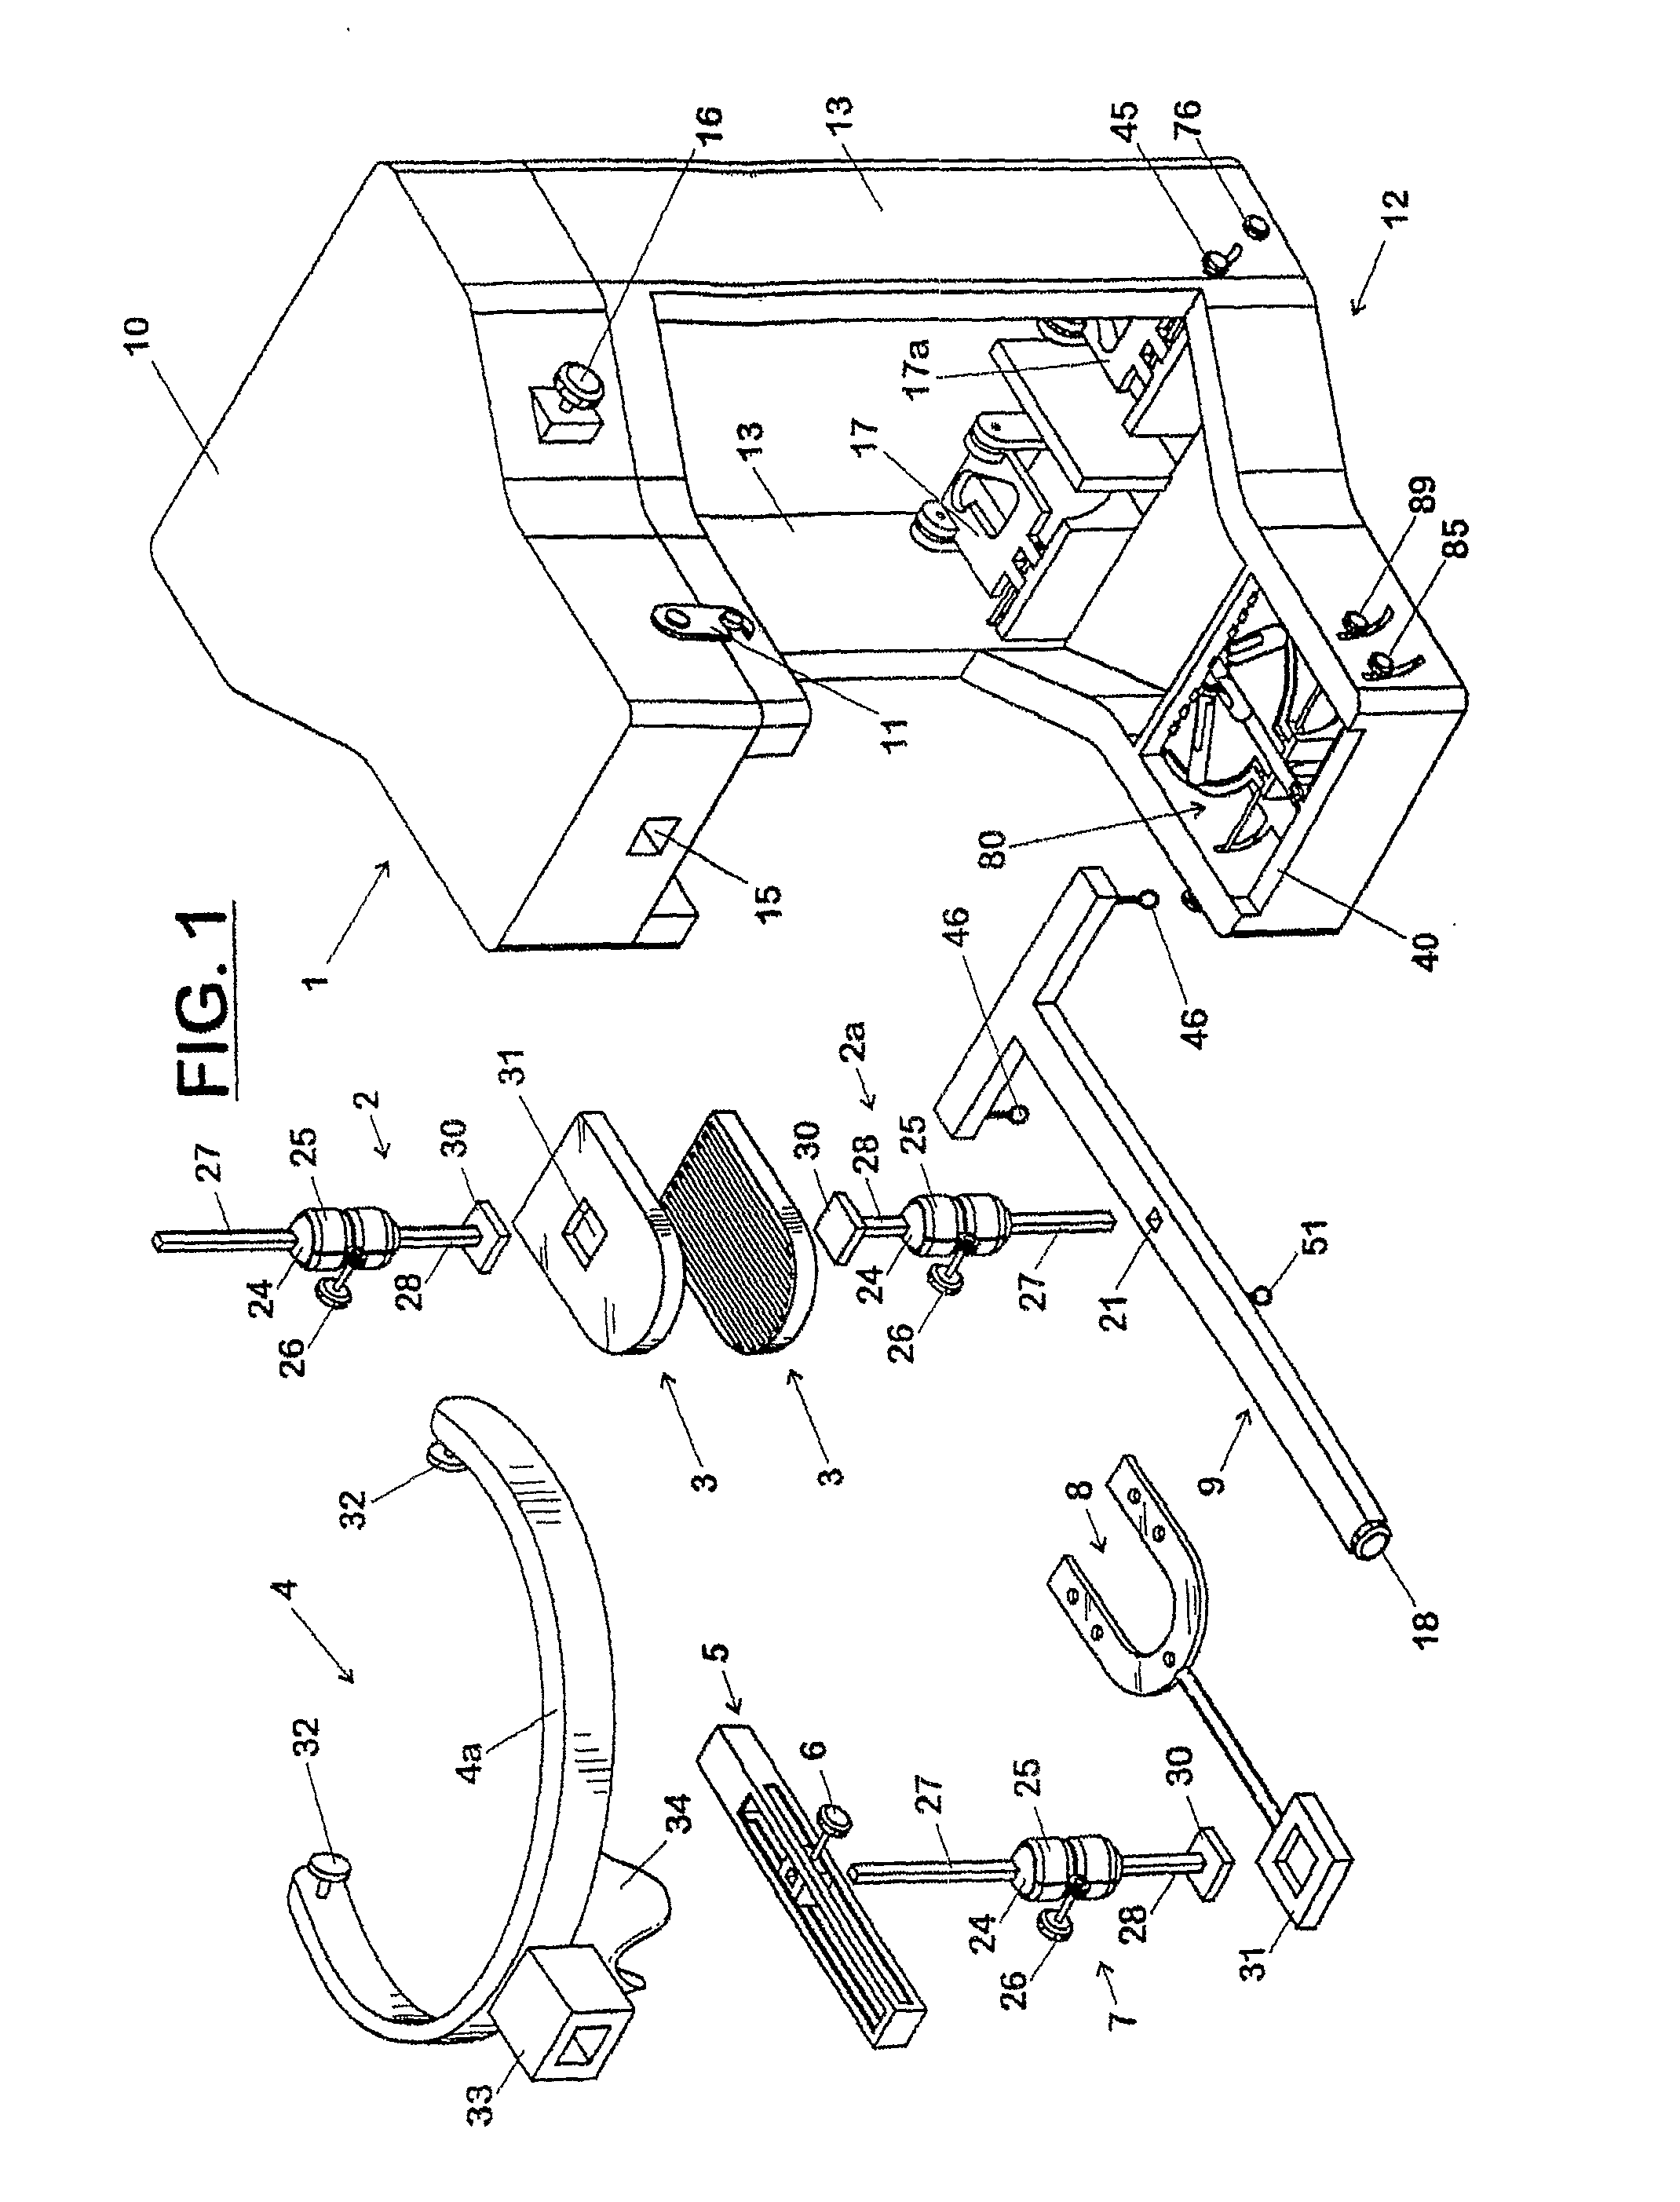 Dental articulator for positioning the arcades without the use of plaster